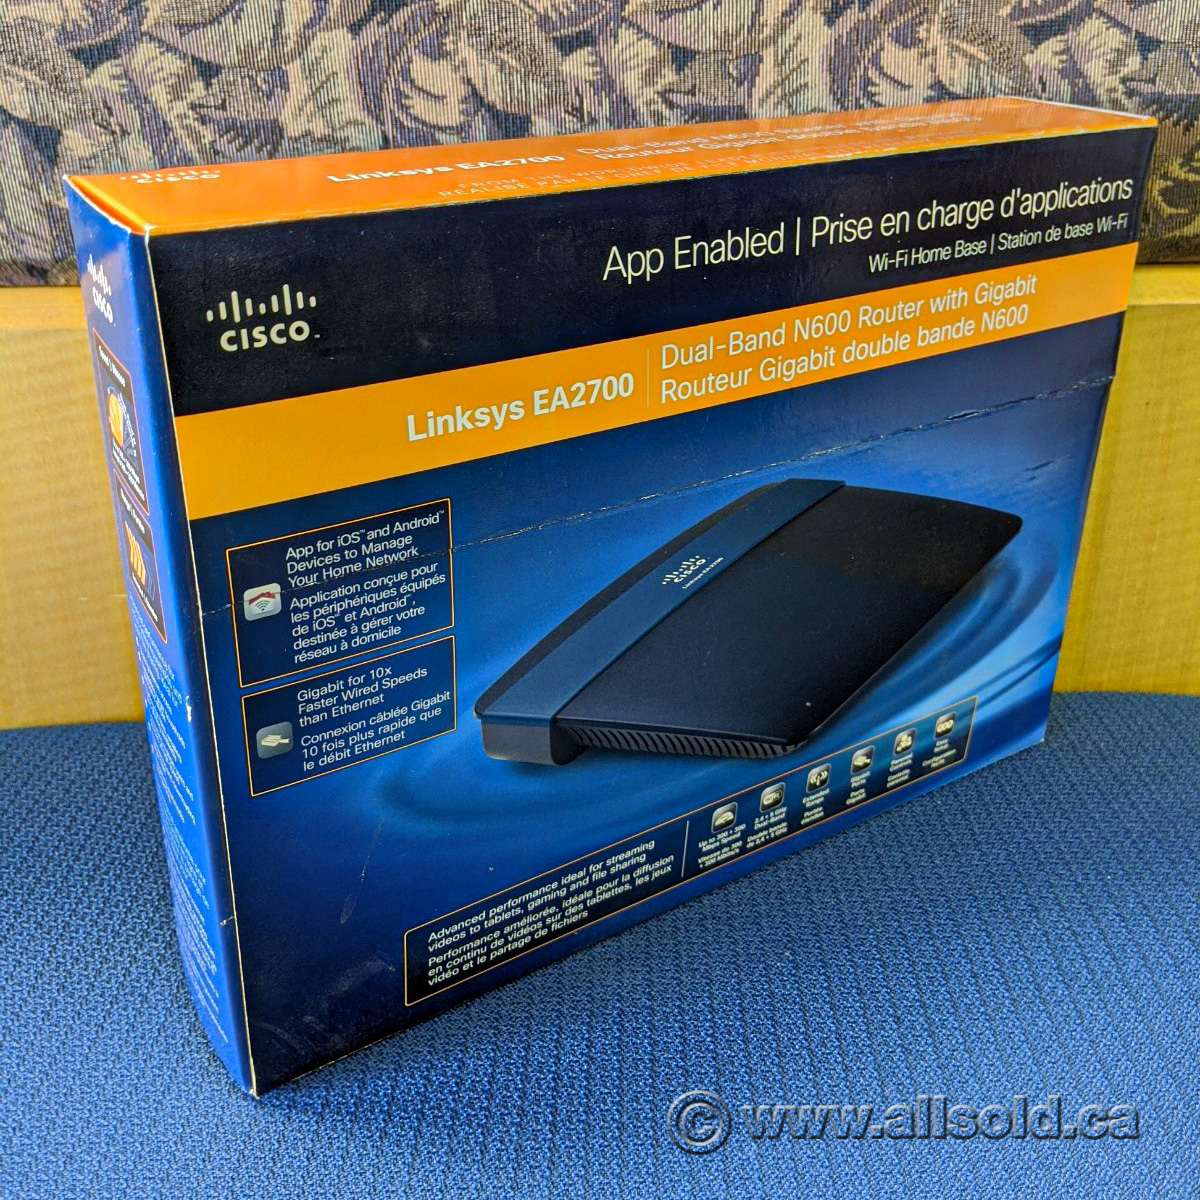 Linksys EA2700 N600 Dual-Band Wi-Fi Router - Allsold.ca - Buy